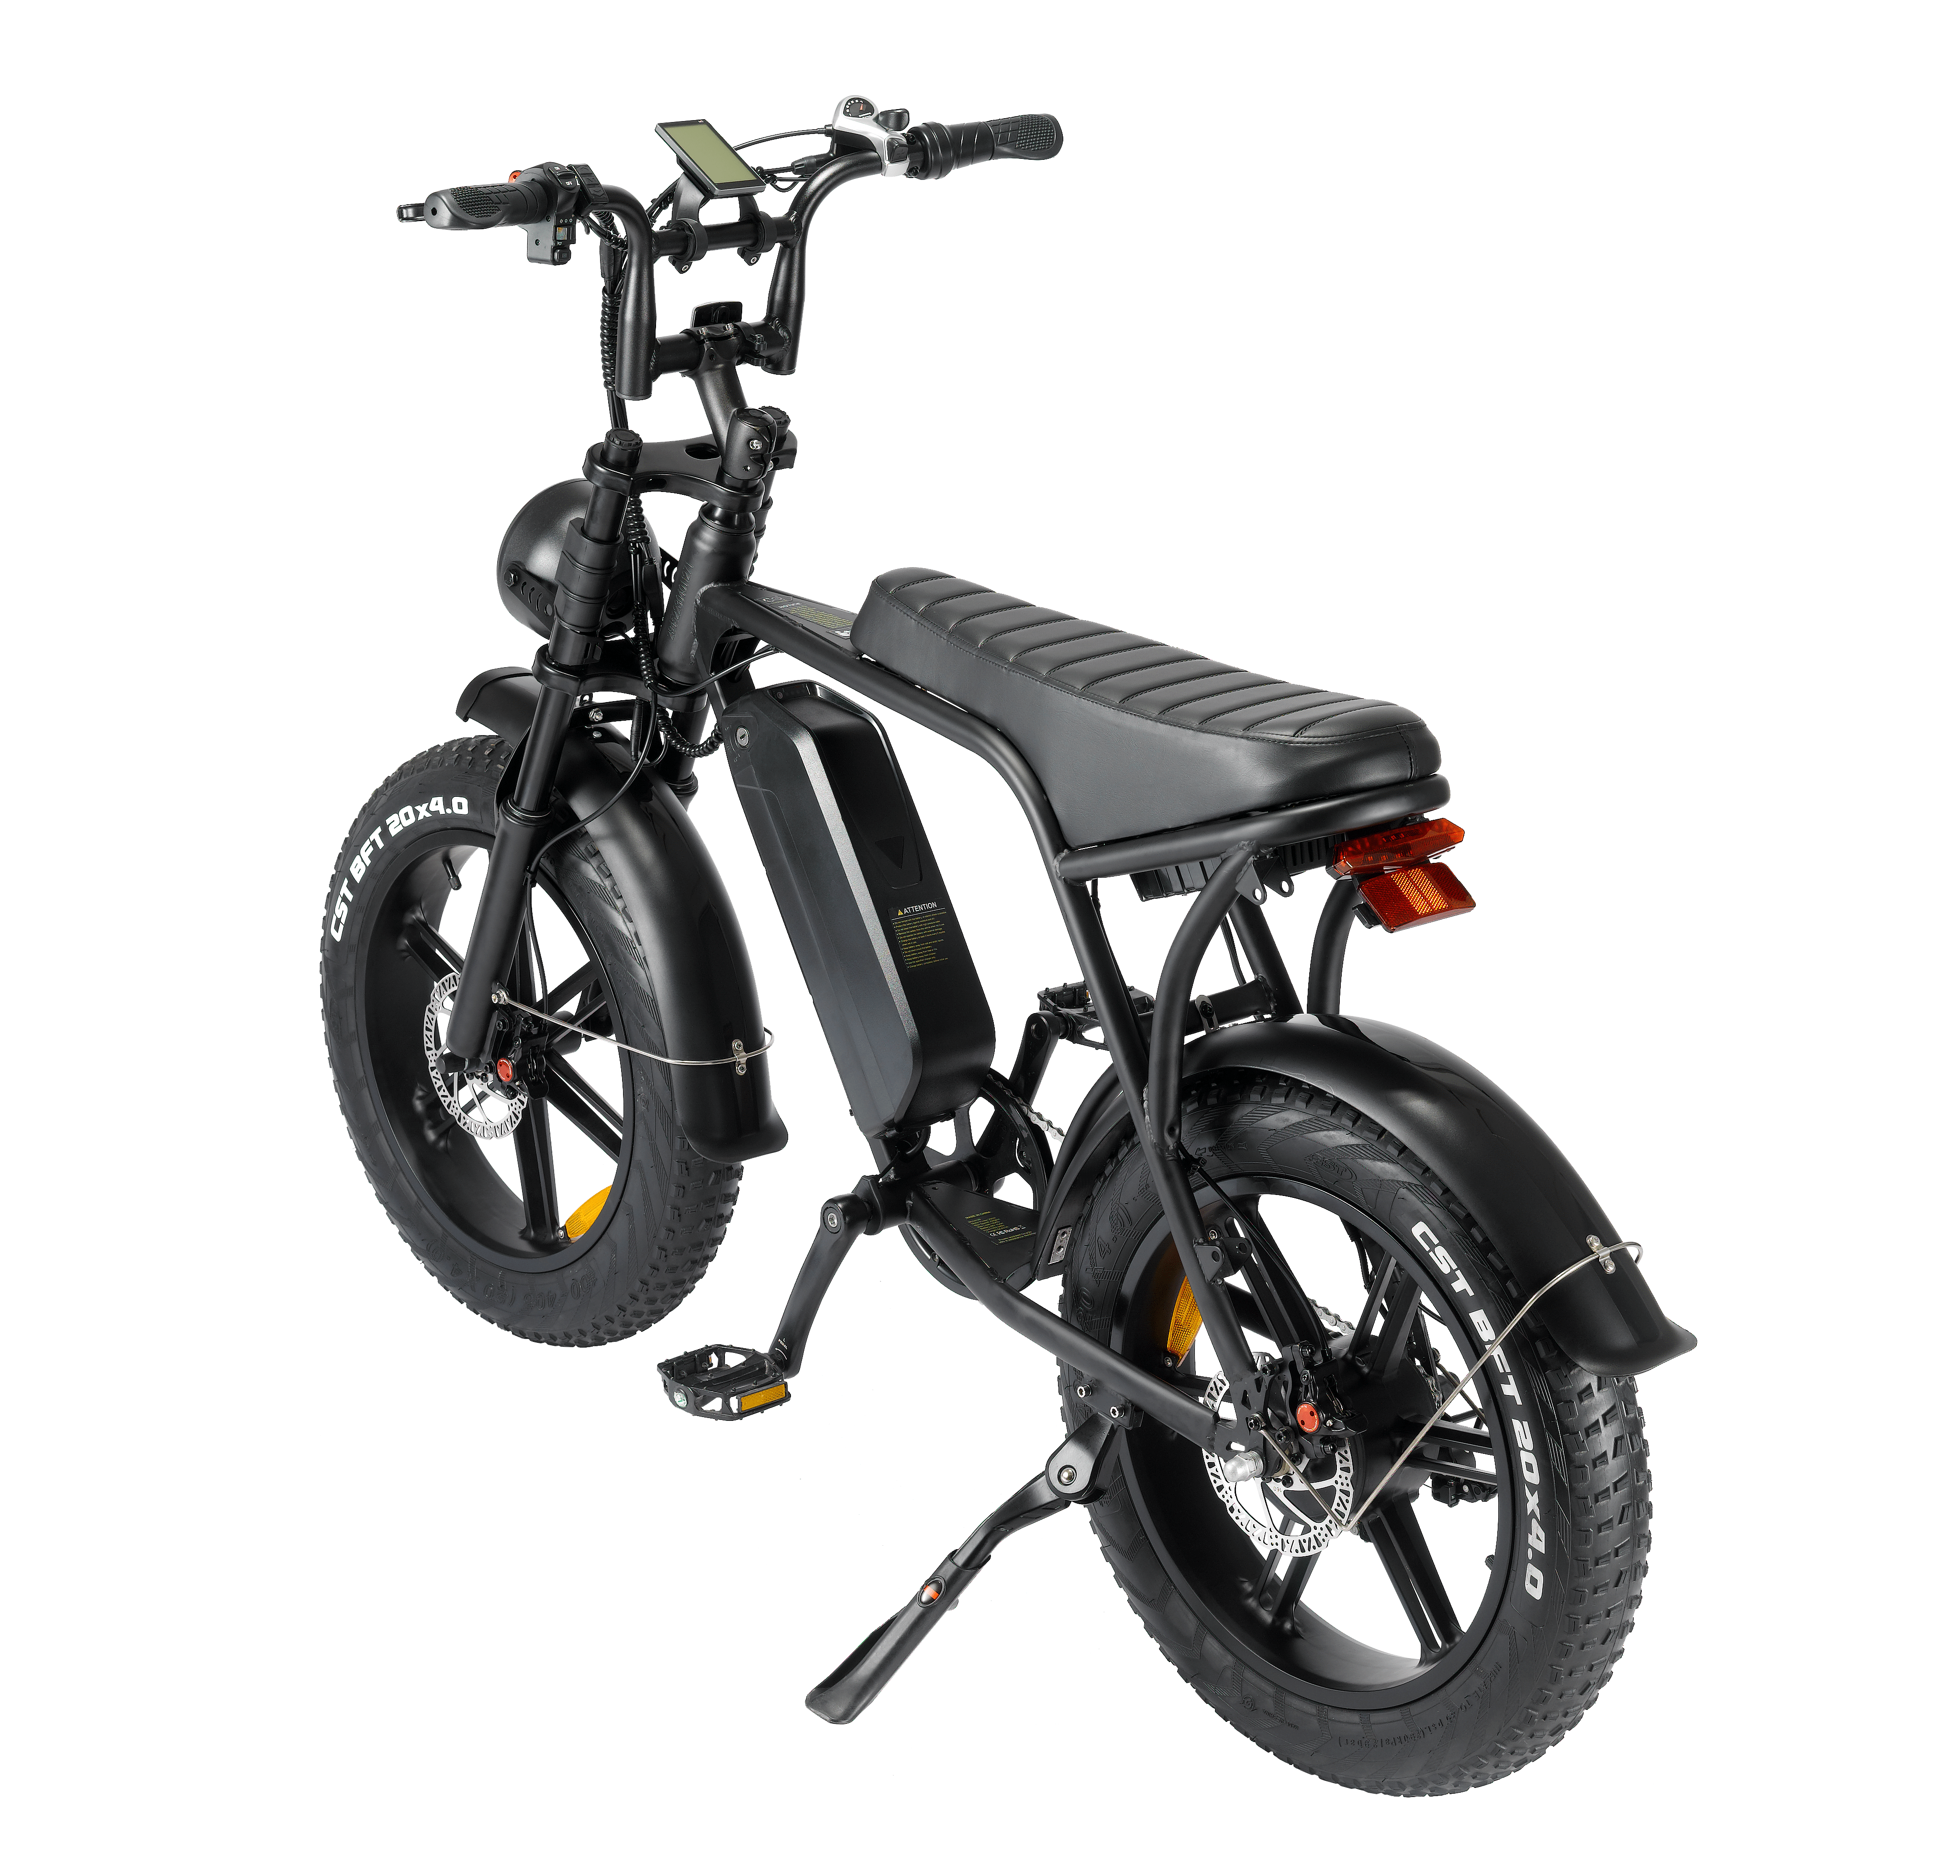 EZ-V8 IEZWAY Electric Bike with 750W Motor, 48V15Ah Battery, Max Speed 31mph and 20 inch Fat Tires